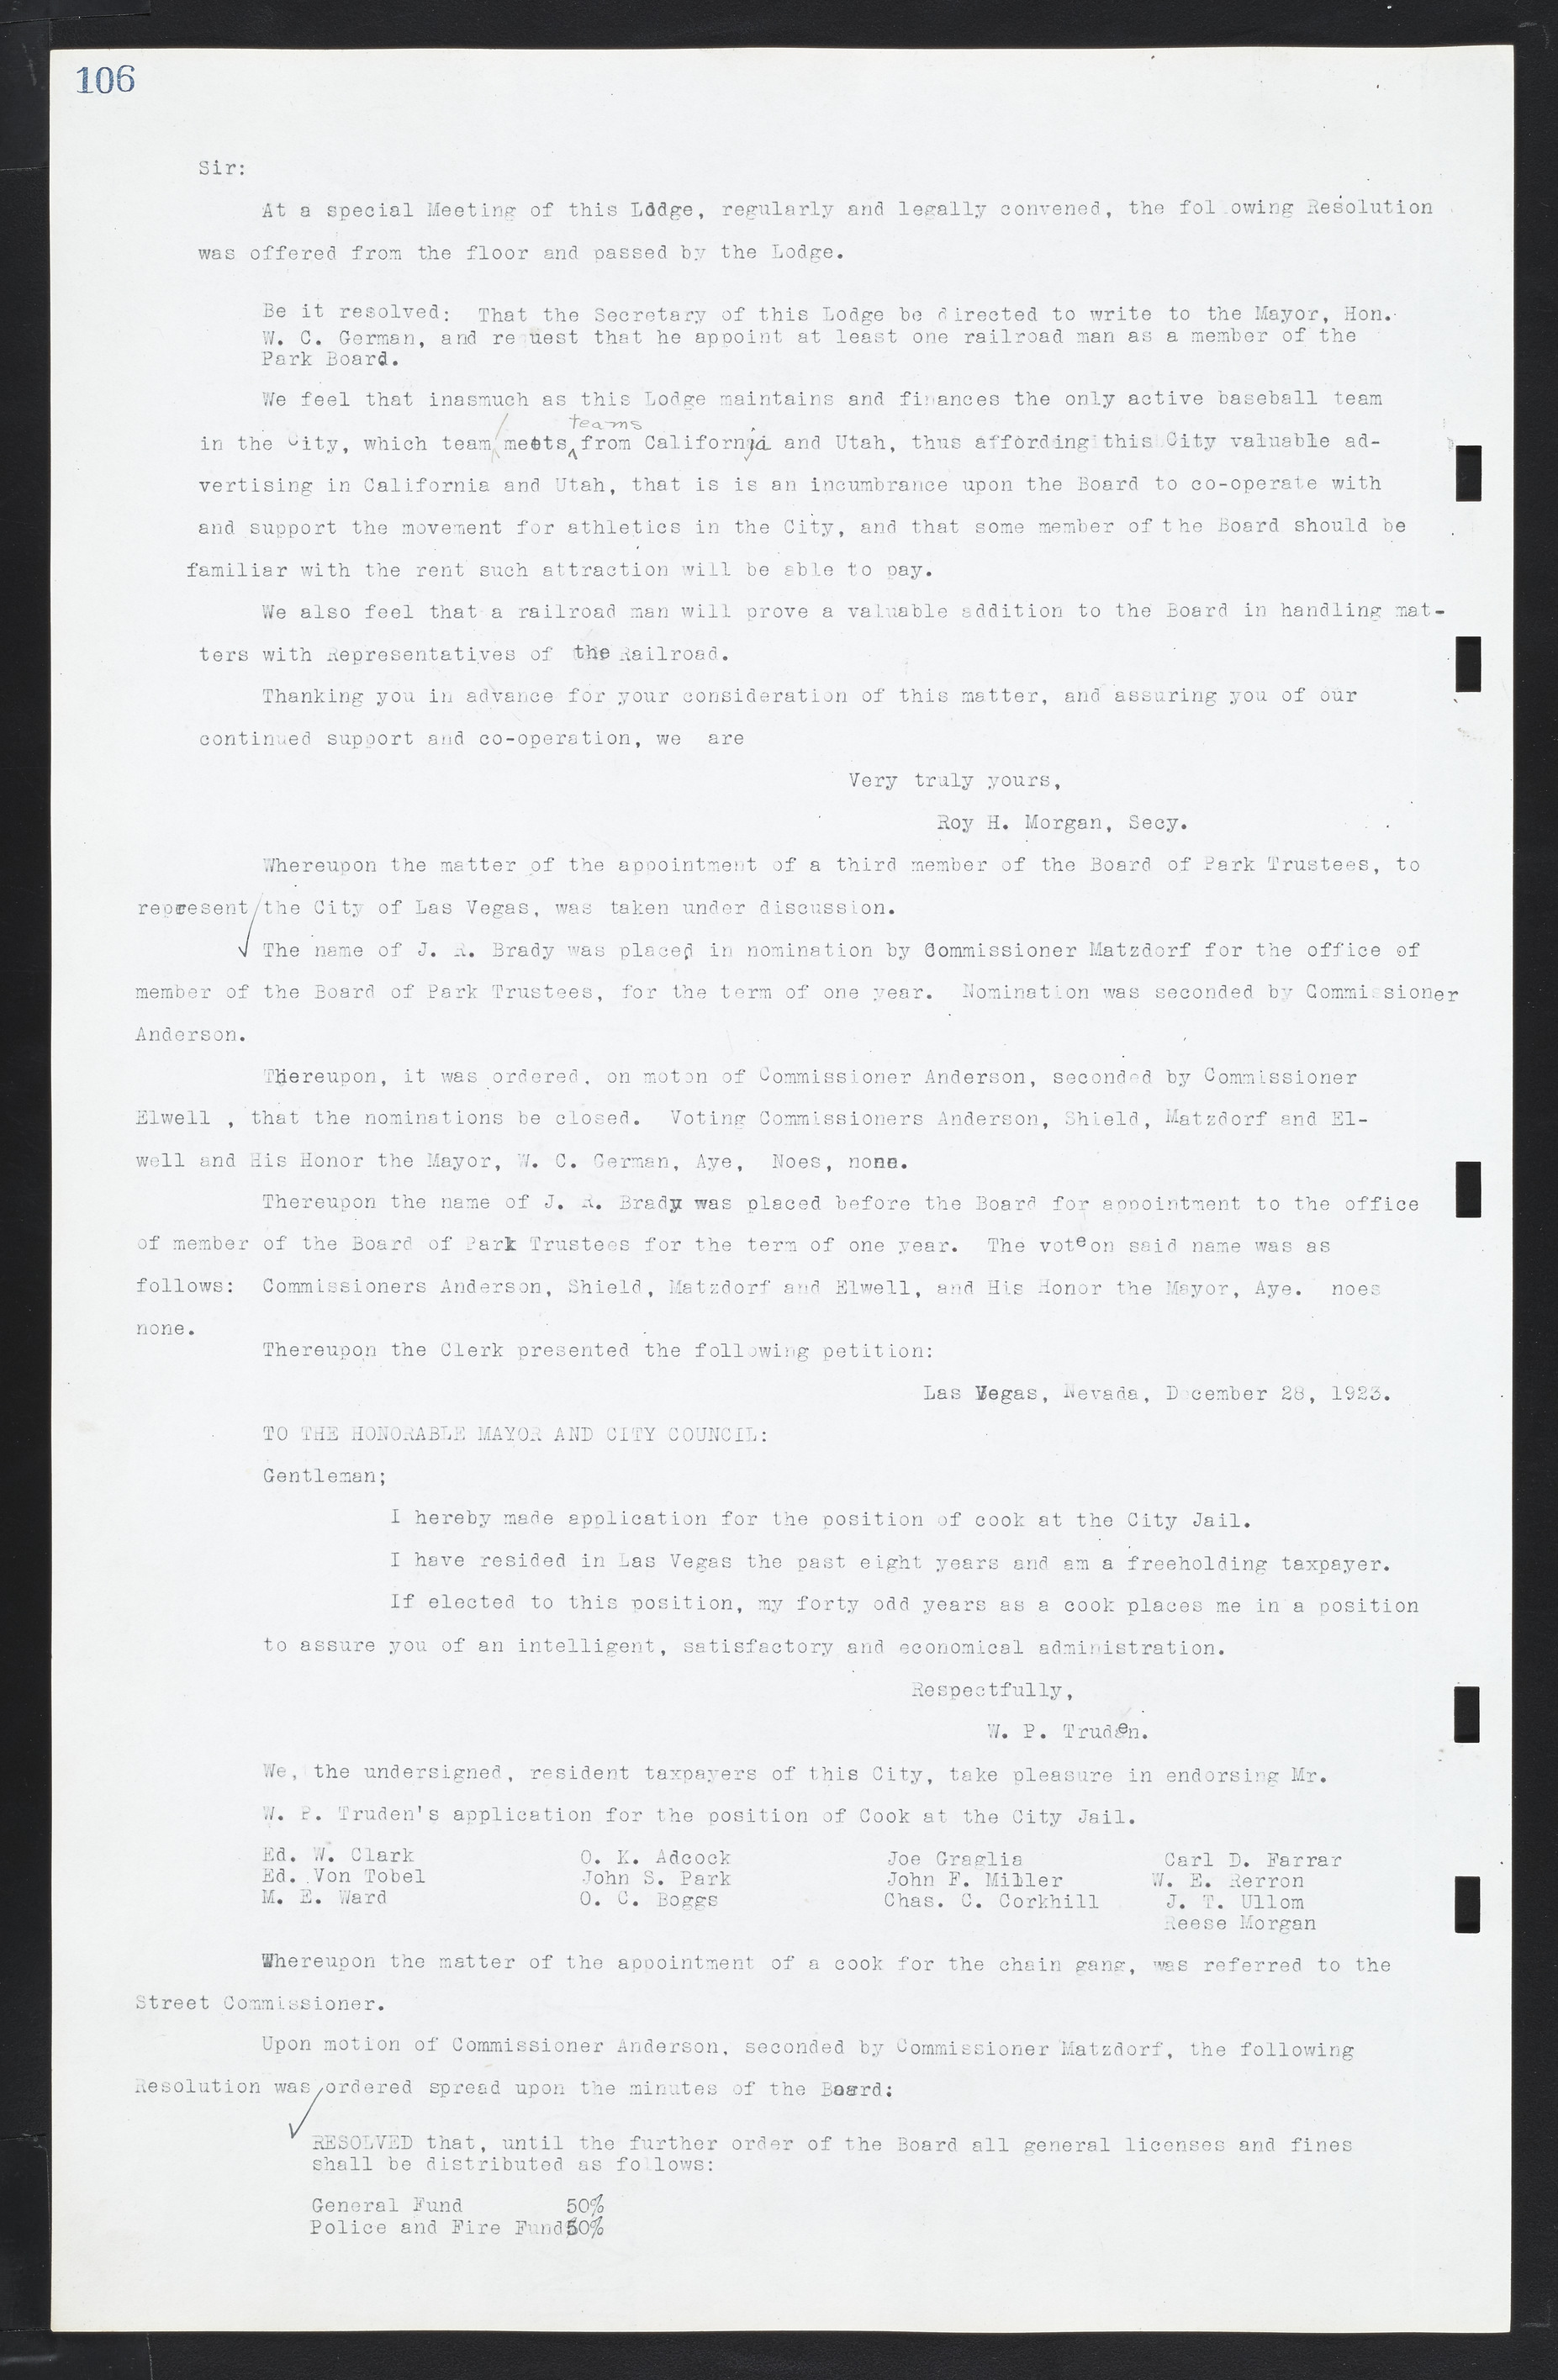 Las Vegas City Commission Minutes, March 1, 1922 to May 10, 1929, lvc000002-113